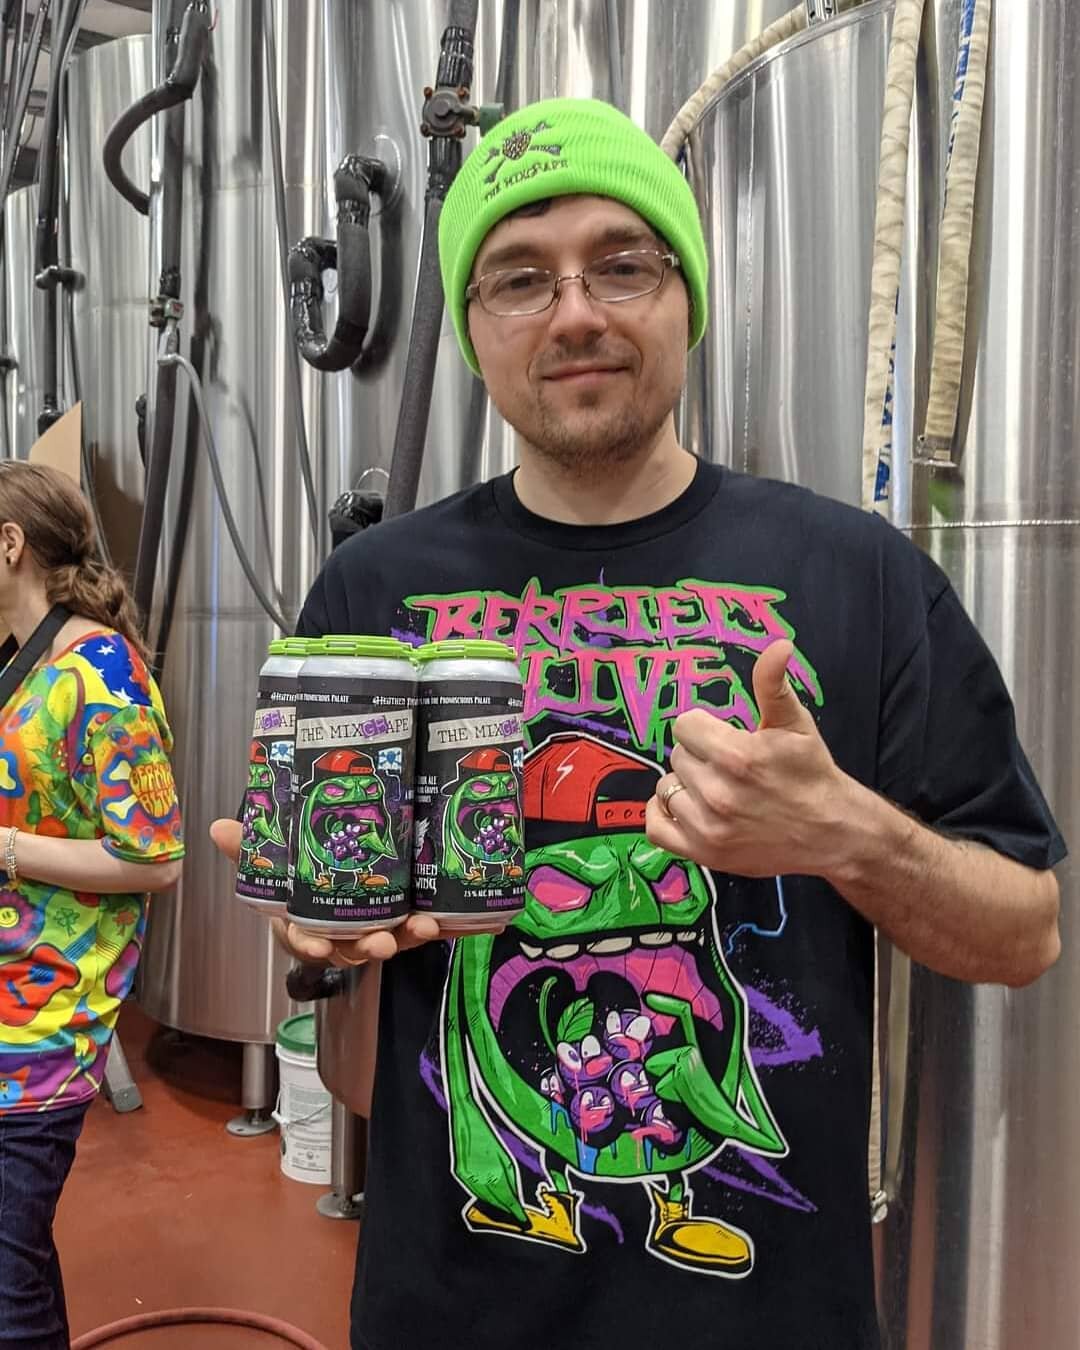 @heathenbrewing connected with internet famous Metal musicians @berriedaliveofficial to brew a fruited sour with raspberries and Pinot Noir grapes from Heathen's very own vineyards. The Mixgrape releases this Friday along with Berried Alive's brand n